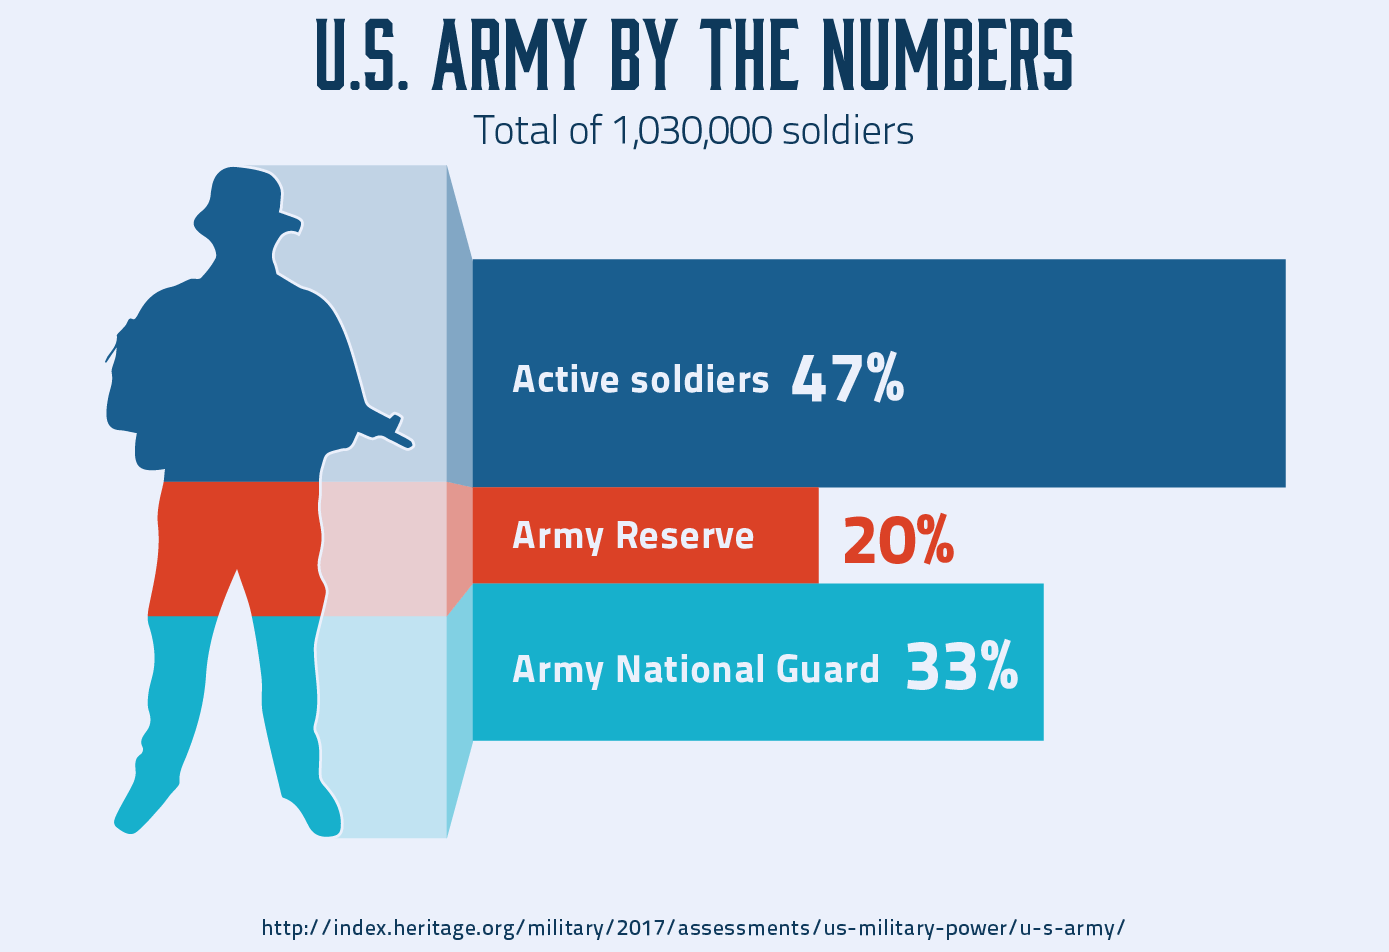 How big is the US army?